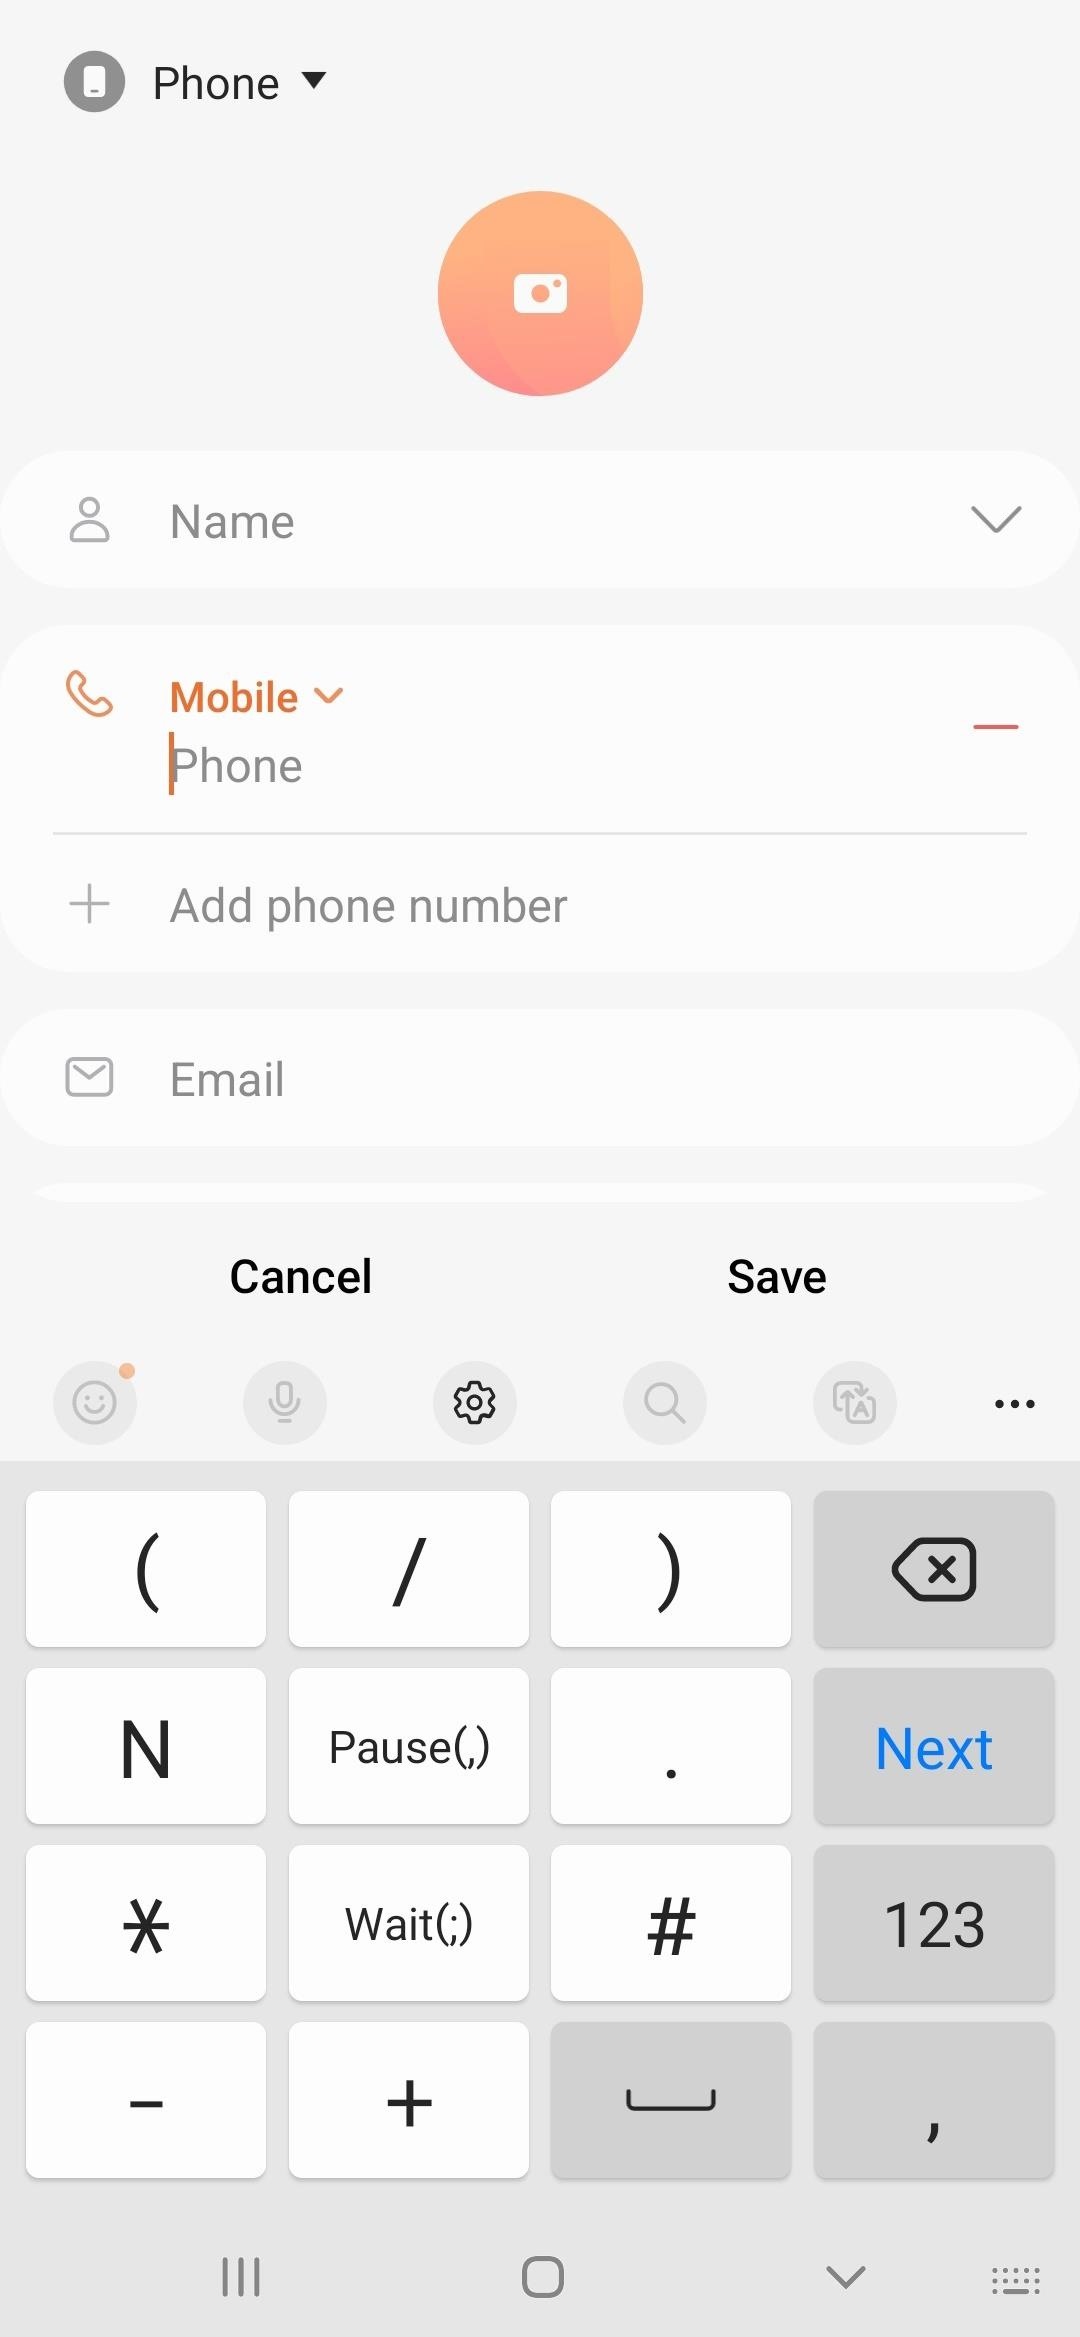 The Hidden Meaning Behind Those Mysterious Dialer Pad Keys on Your iPhone or Android Phone